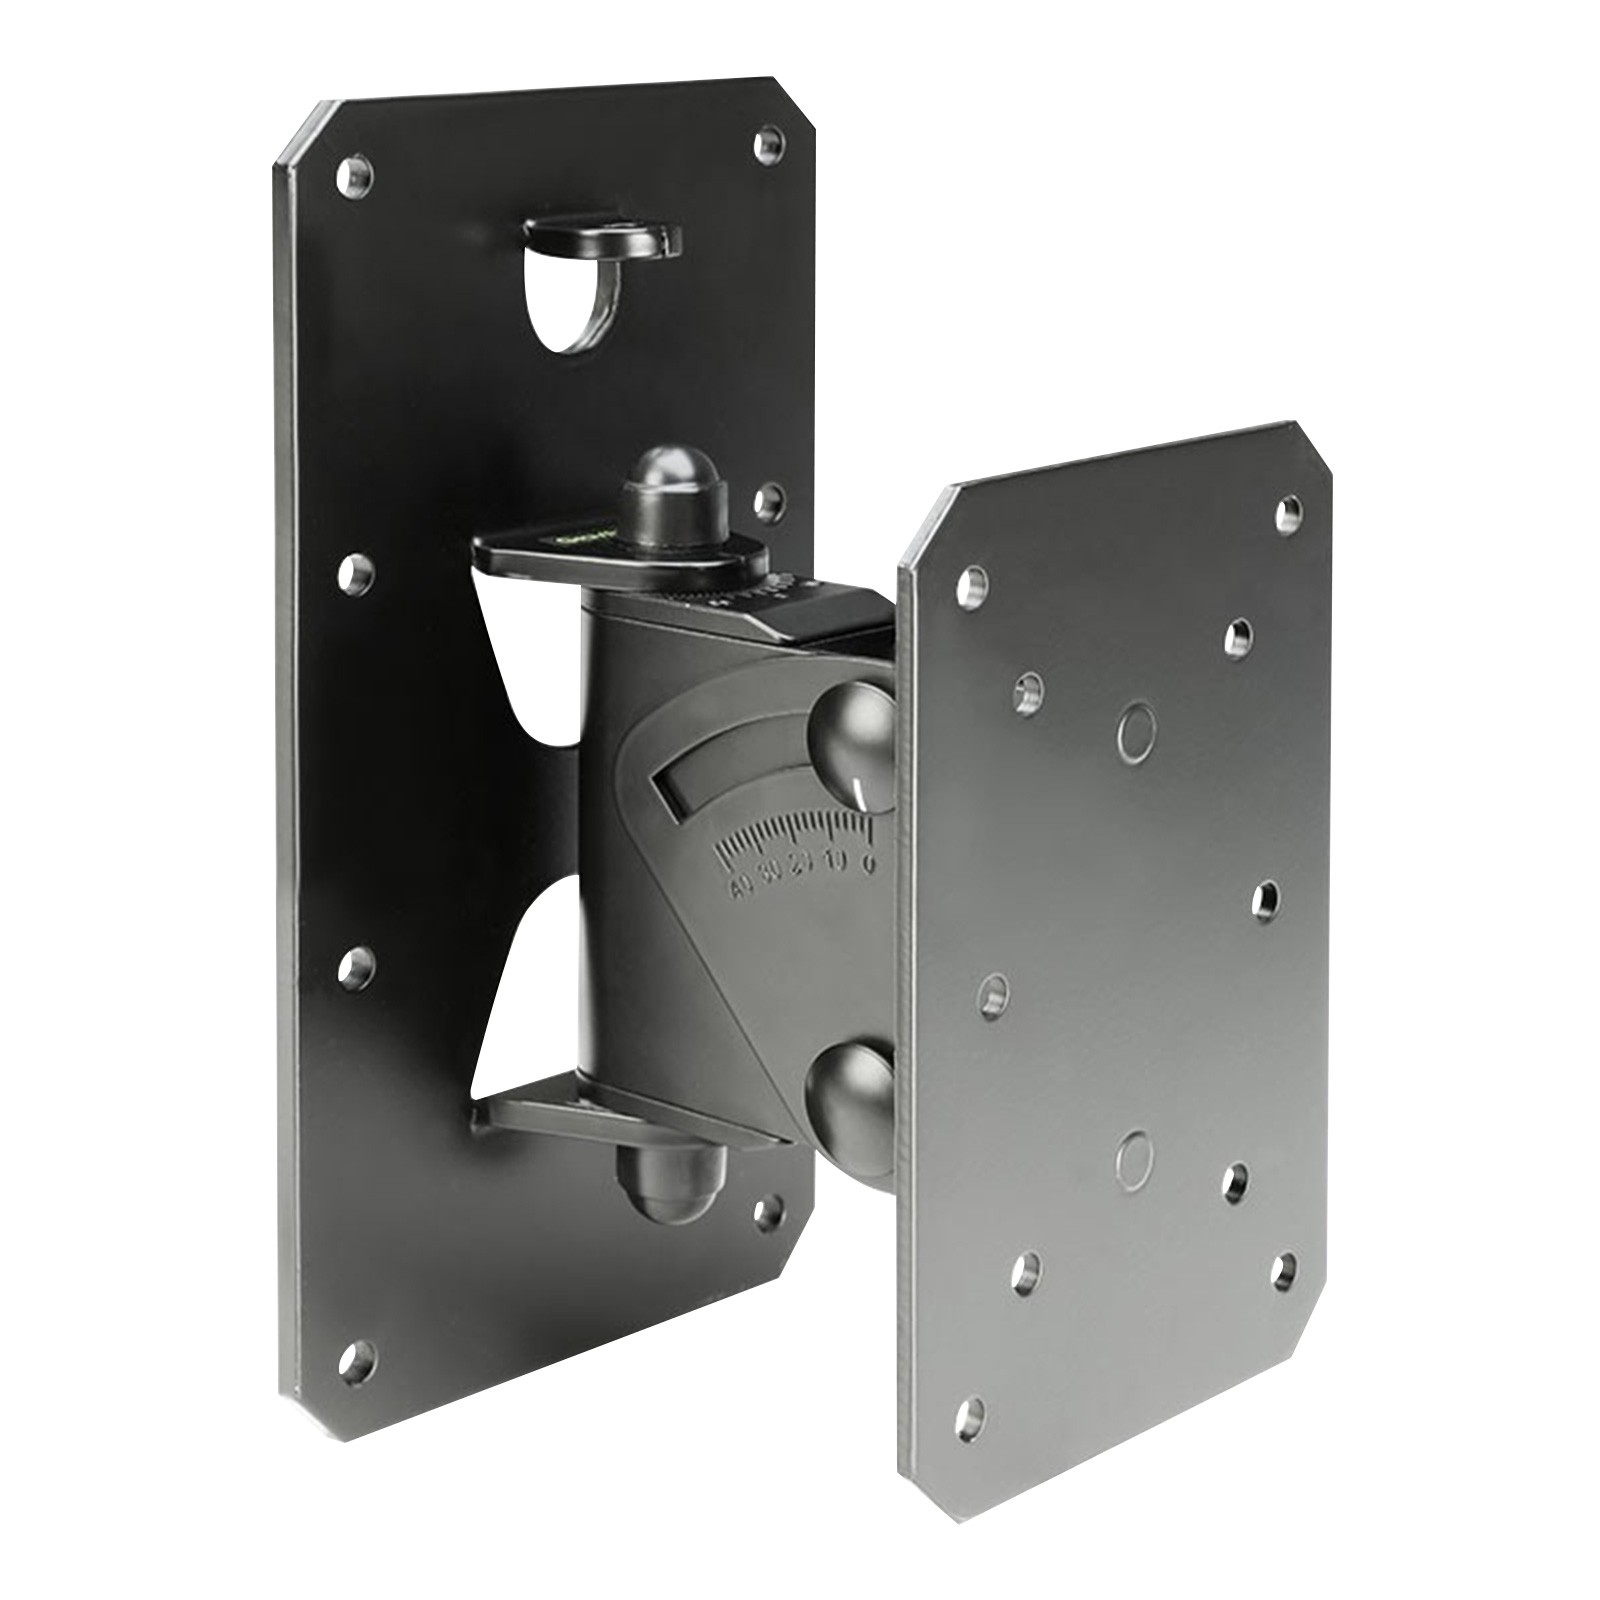 Gravity Stands GSPWMBS30B - Tilt-and-Swivel Wall Mount for Speakers up to 66 lbs (black)